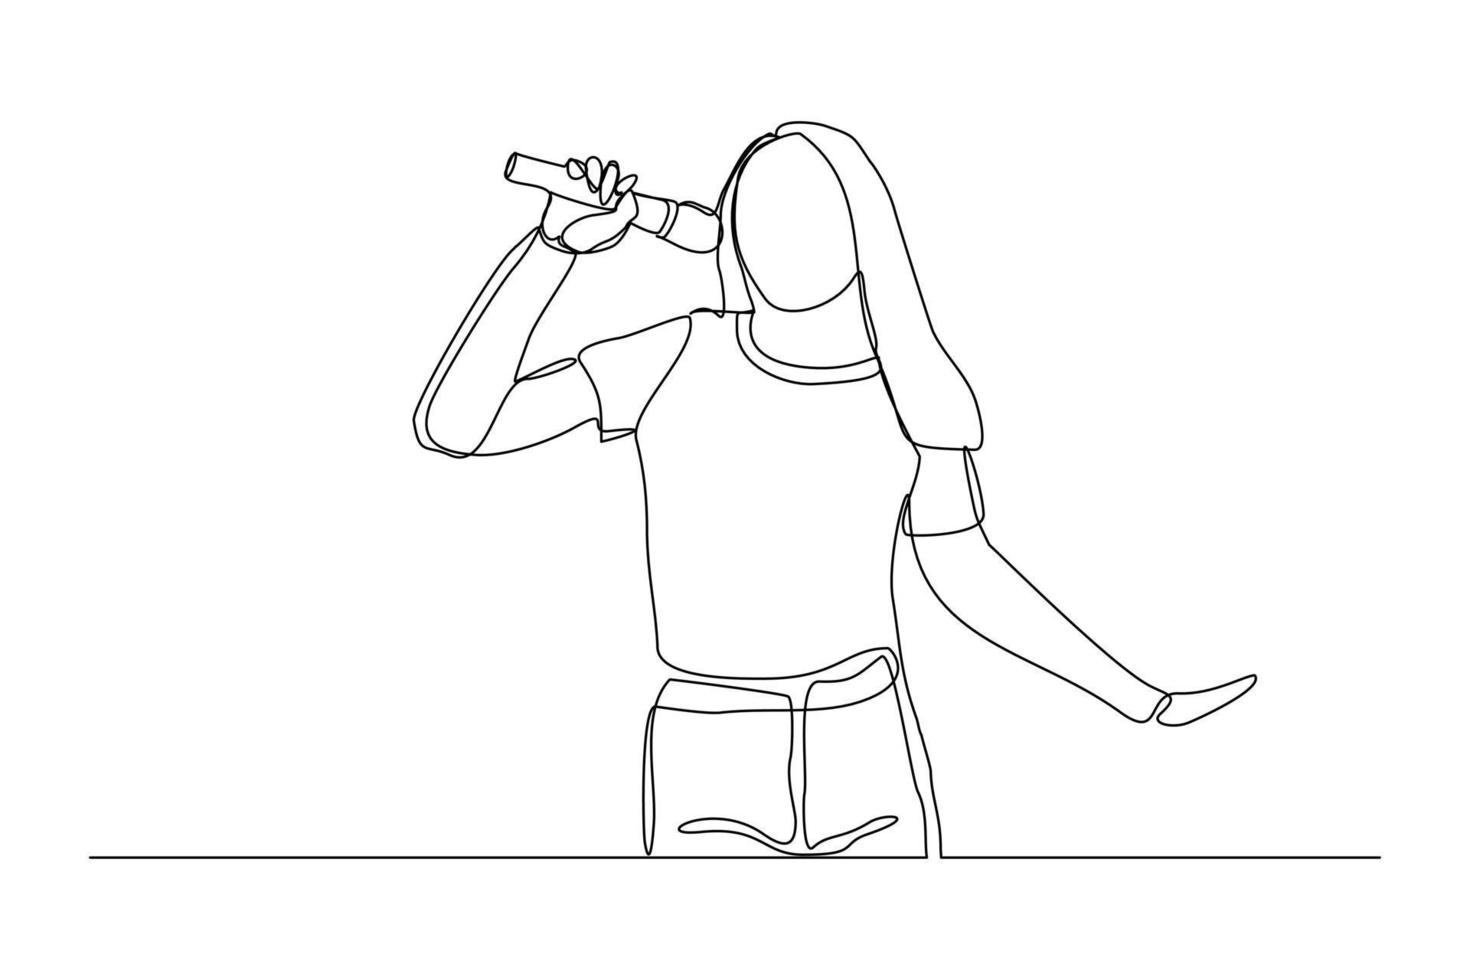 Continuous line drawing of young happy female pop singer holding microphone and singing on stage. Single one line art of musician artist performance concept design vector illustration